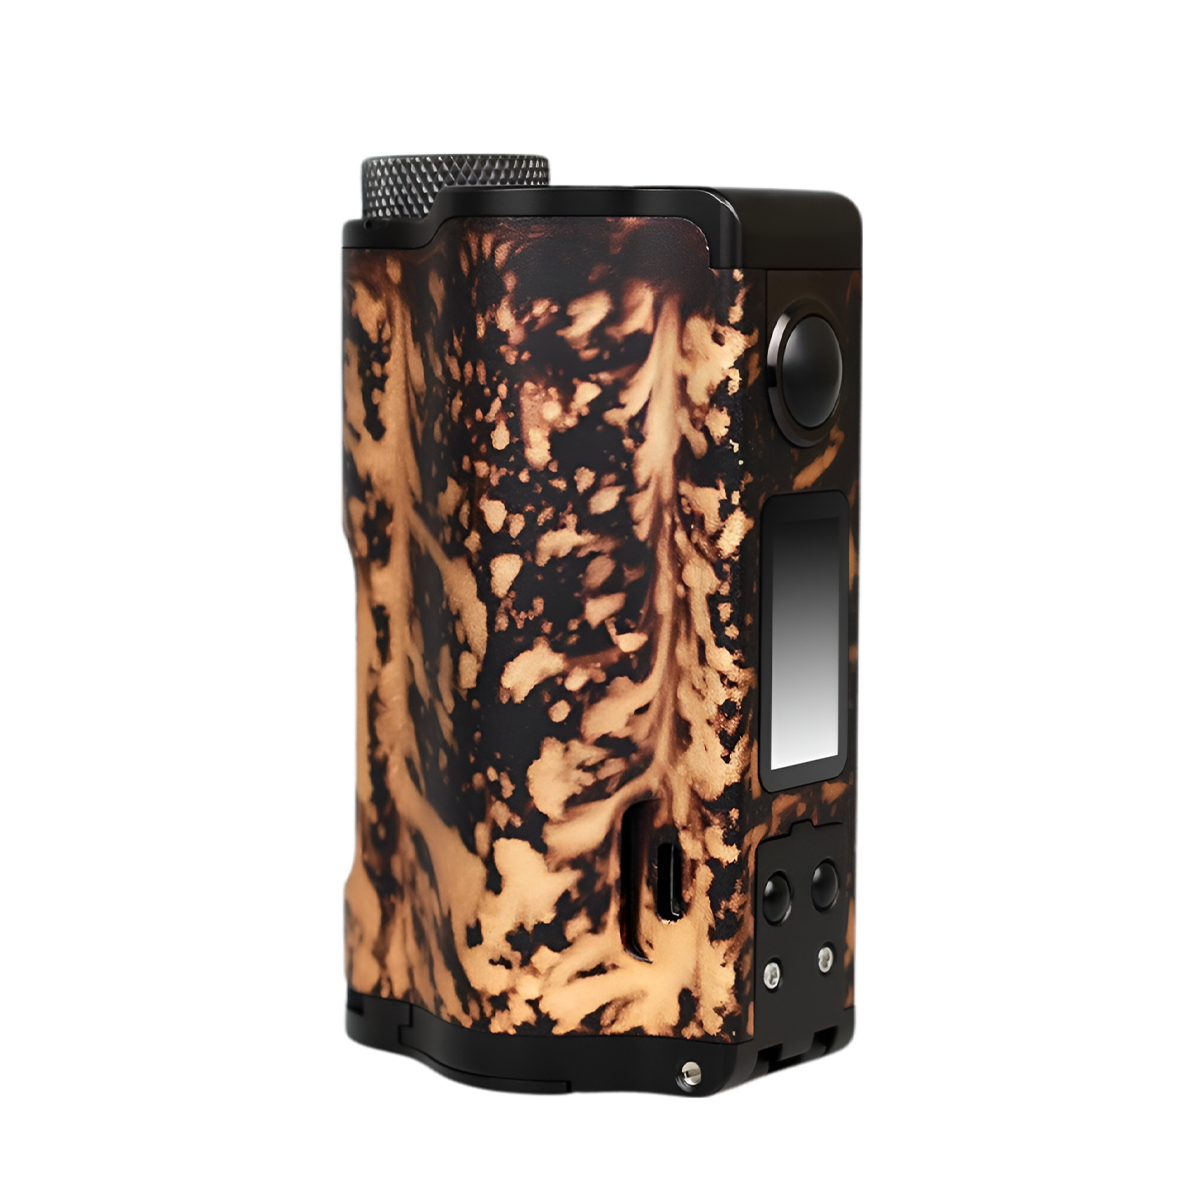 Dovpo Topside Dual 200W Squonk Special Edition Box-Mod Kit Se Black Gold  